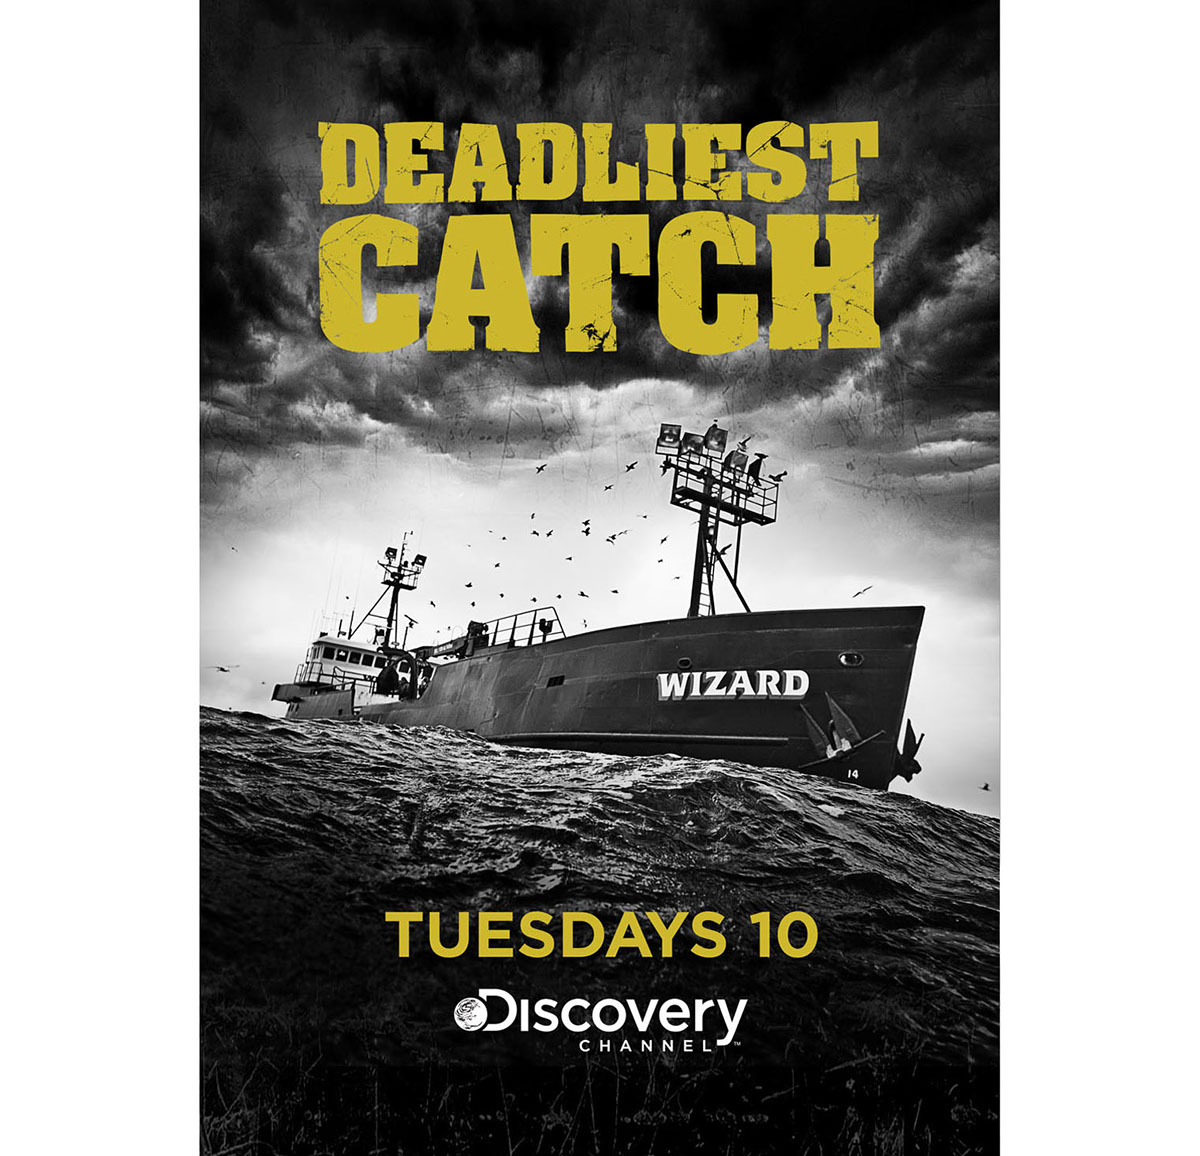 Discovery Channel Deadliest Catch outdoor ad campaign